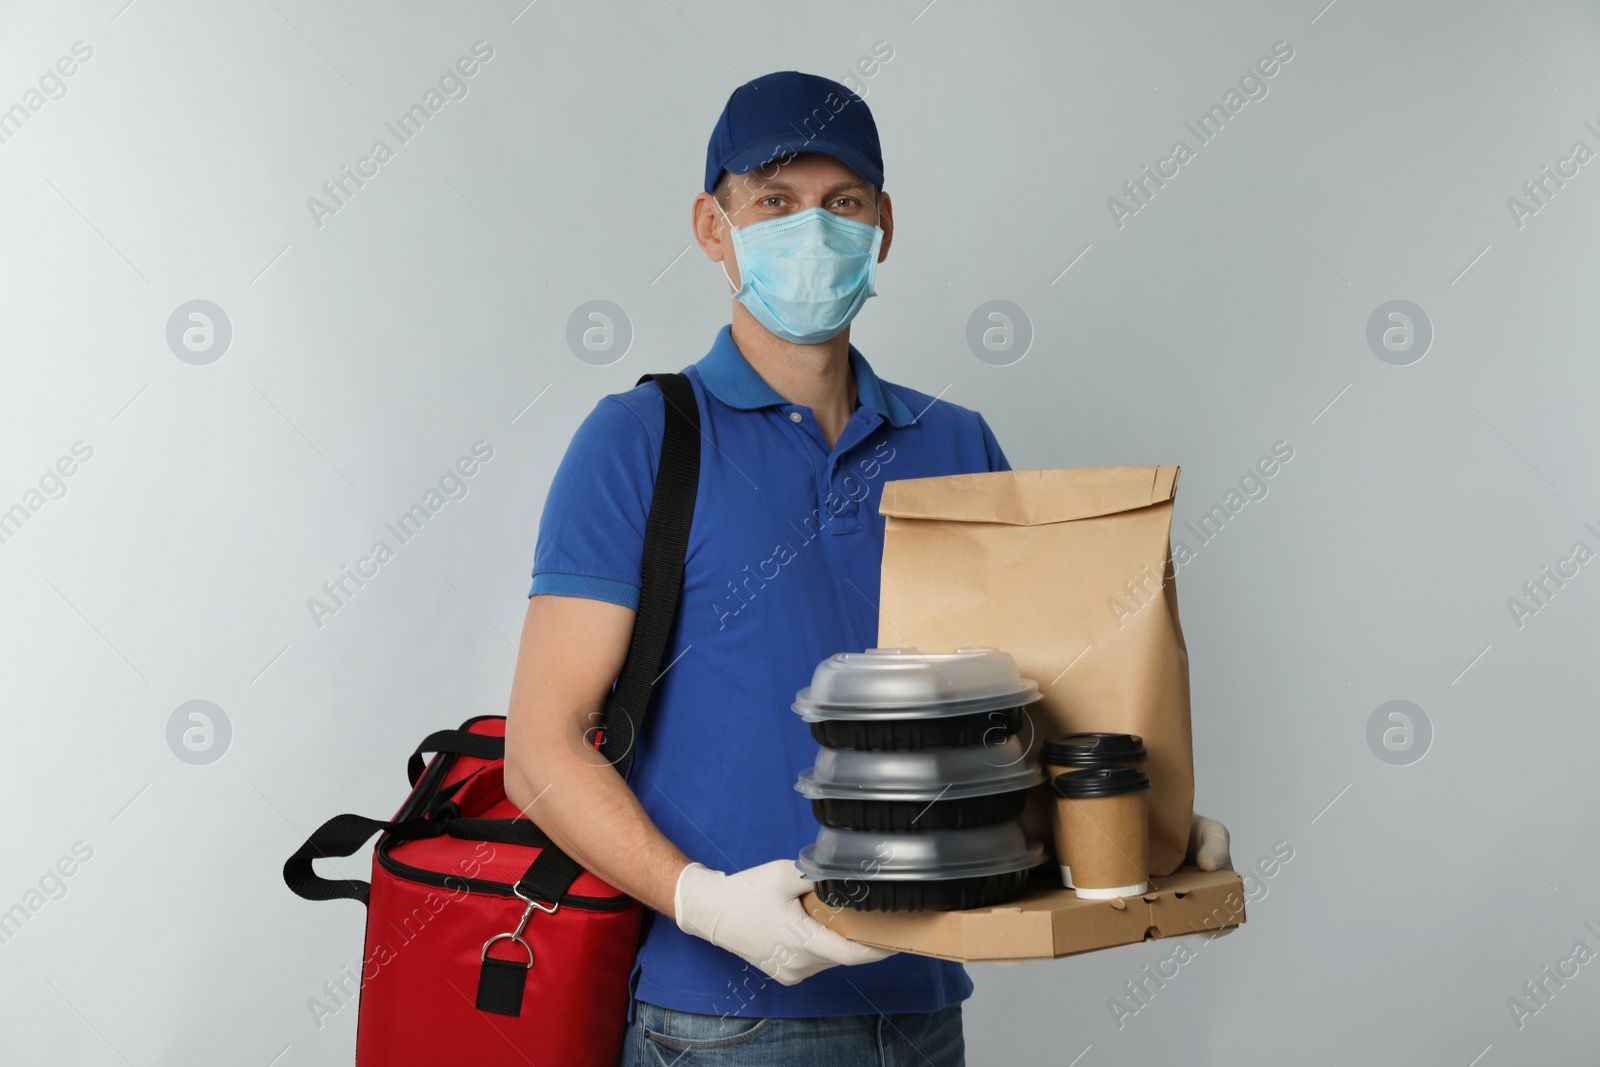 Photo of Courier in protective mask and gloves holding order on light background. Food delivery service during coronavirus quarantine